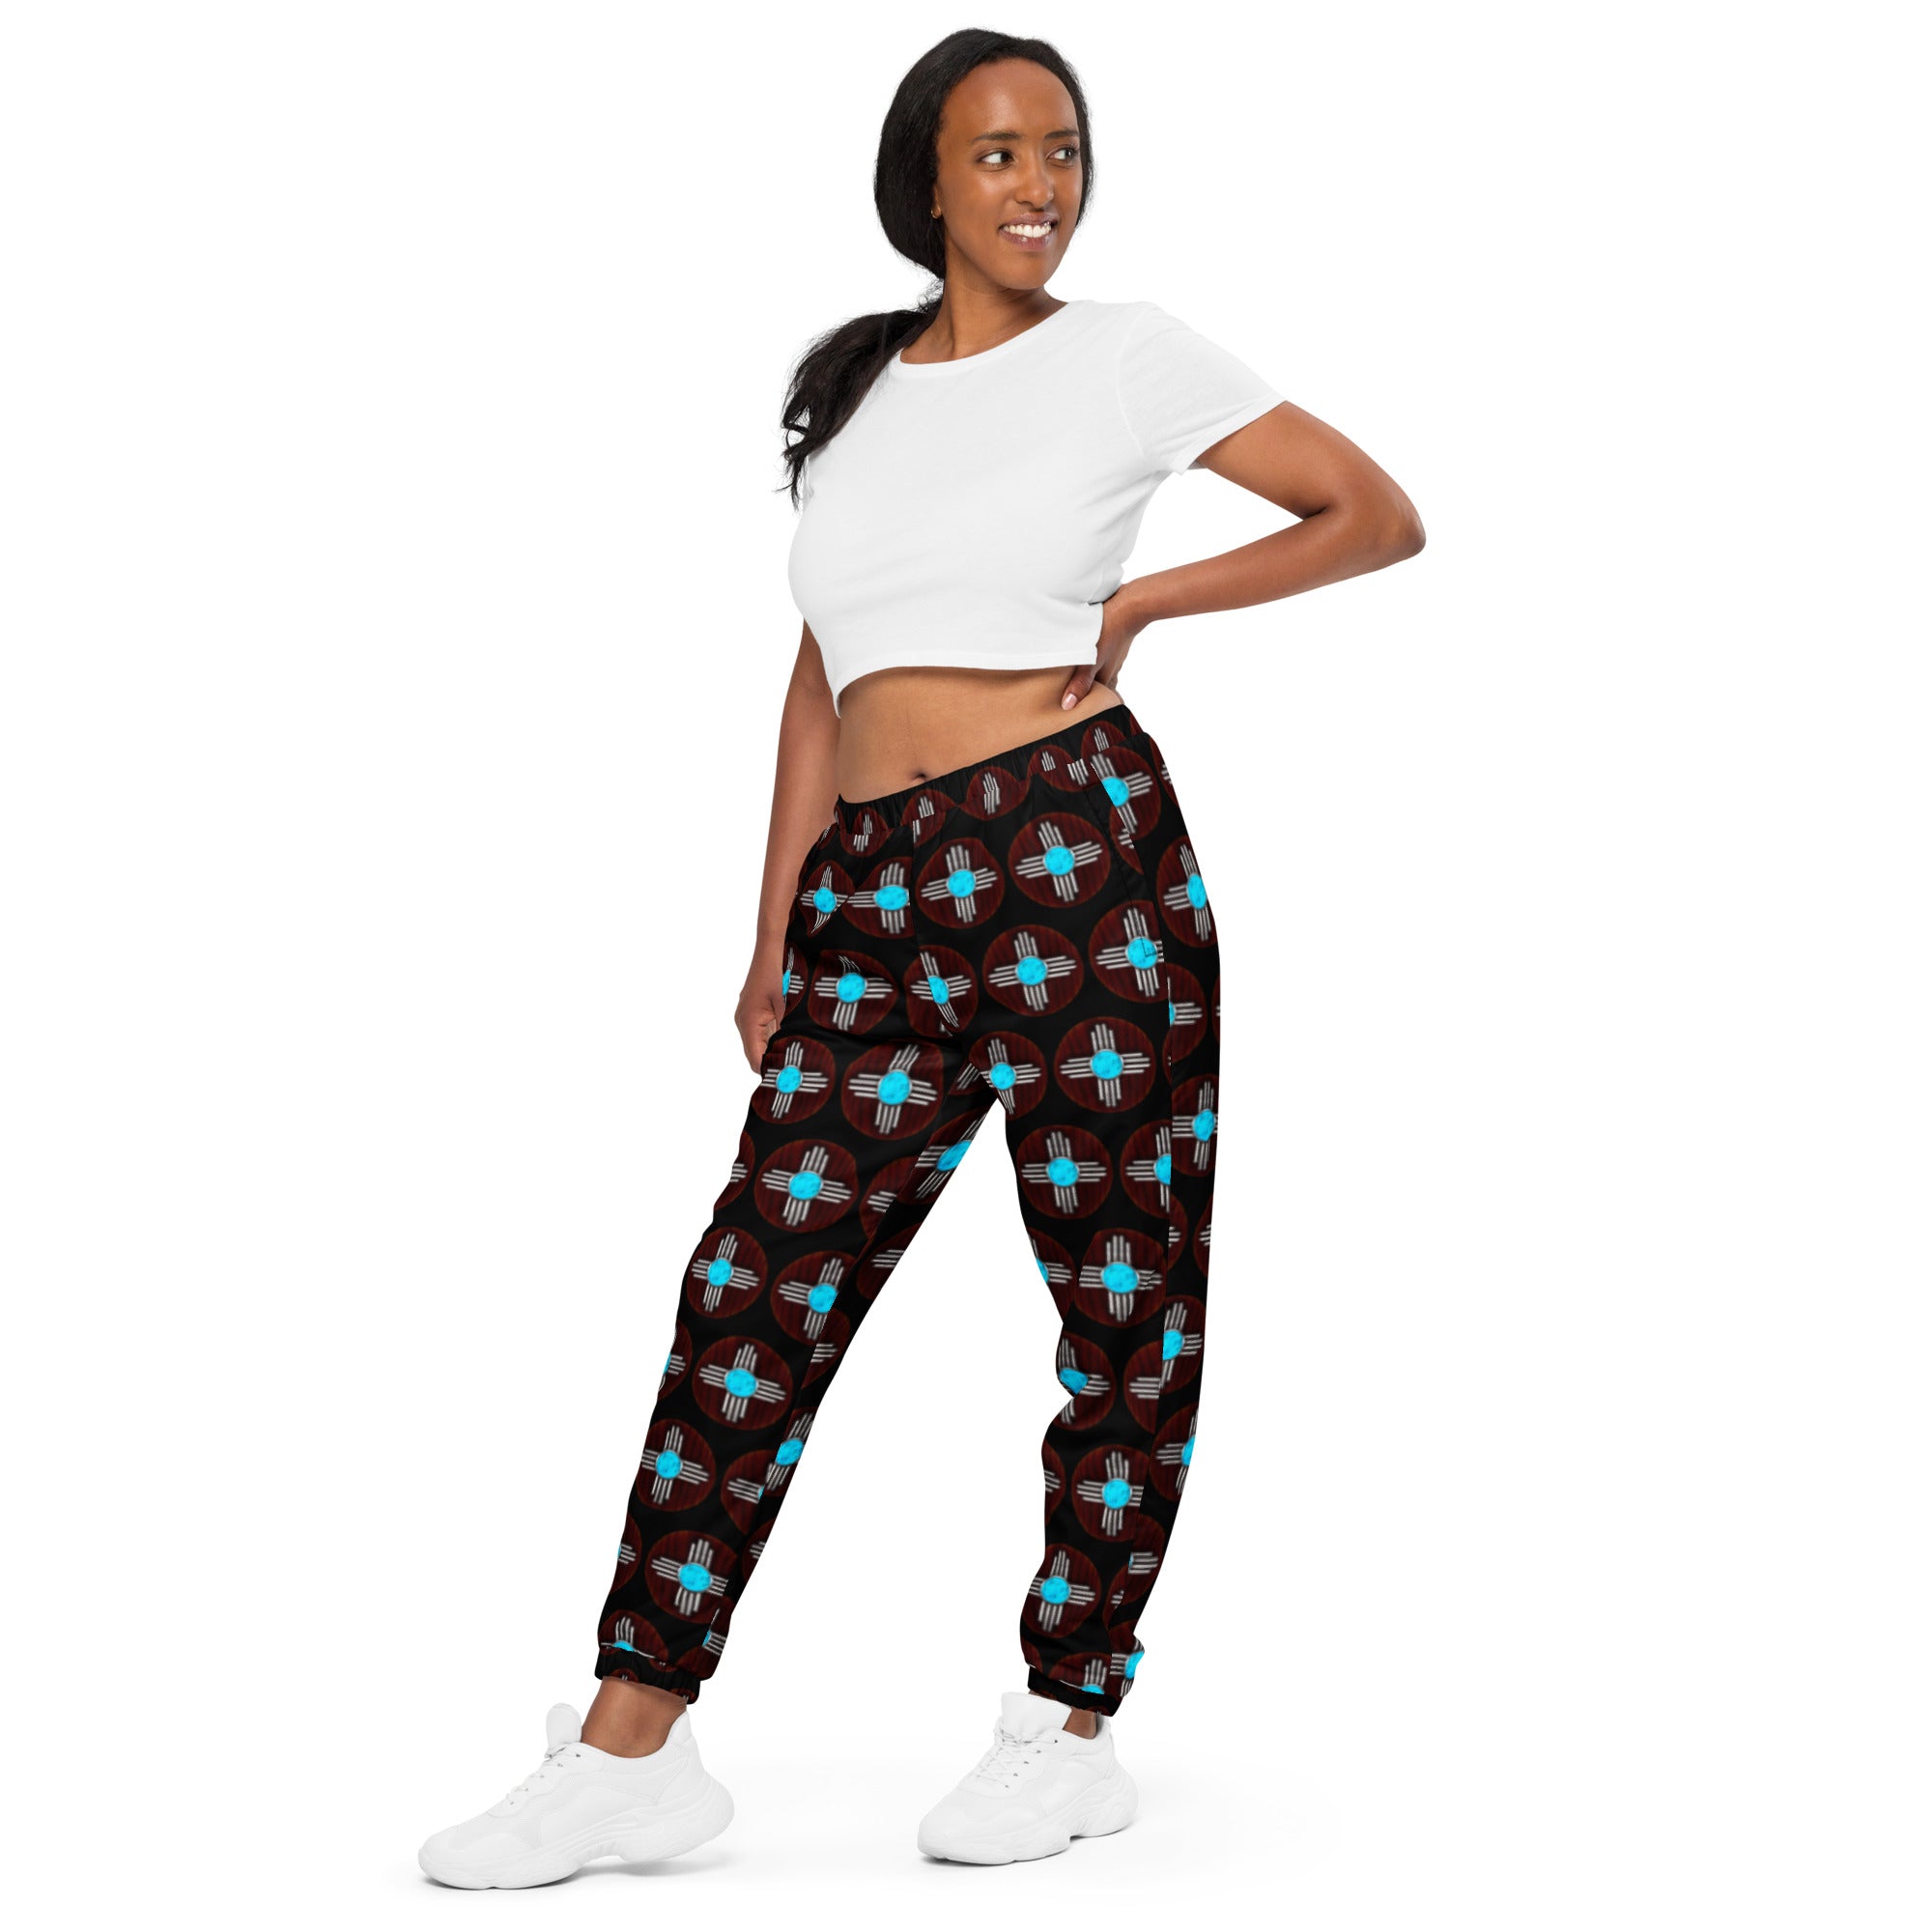 Trackpants: Buy Women Airforce Blue Polyester Trackpants on Cliths